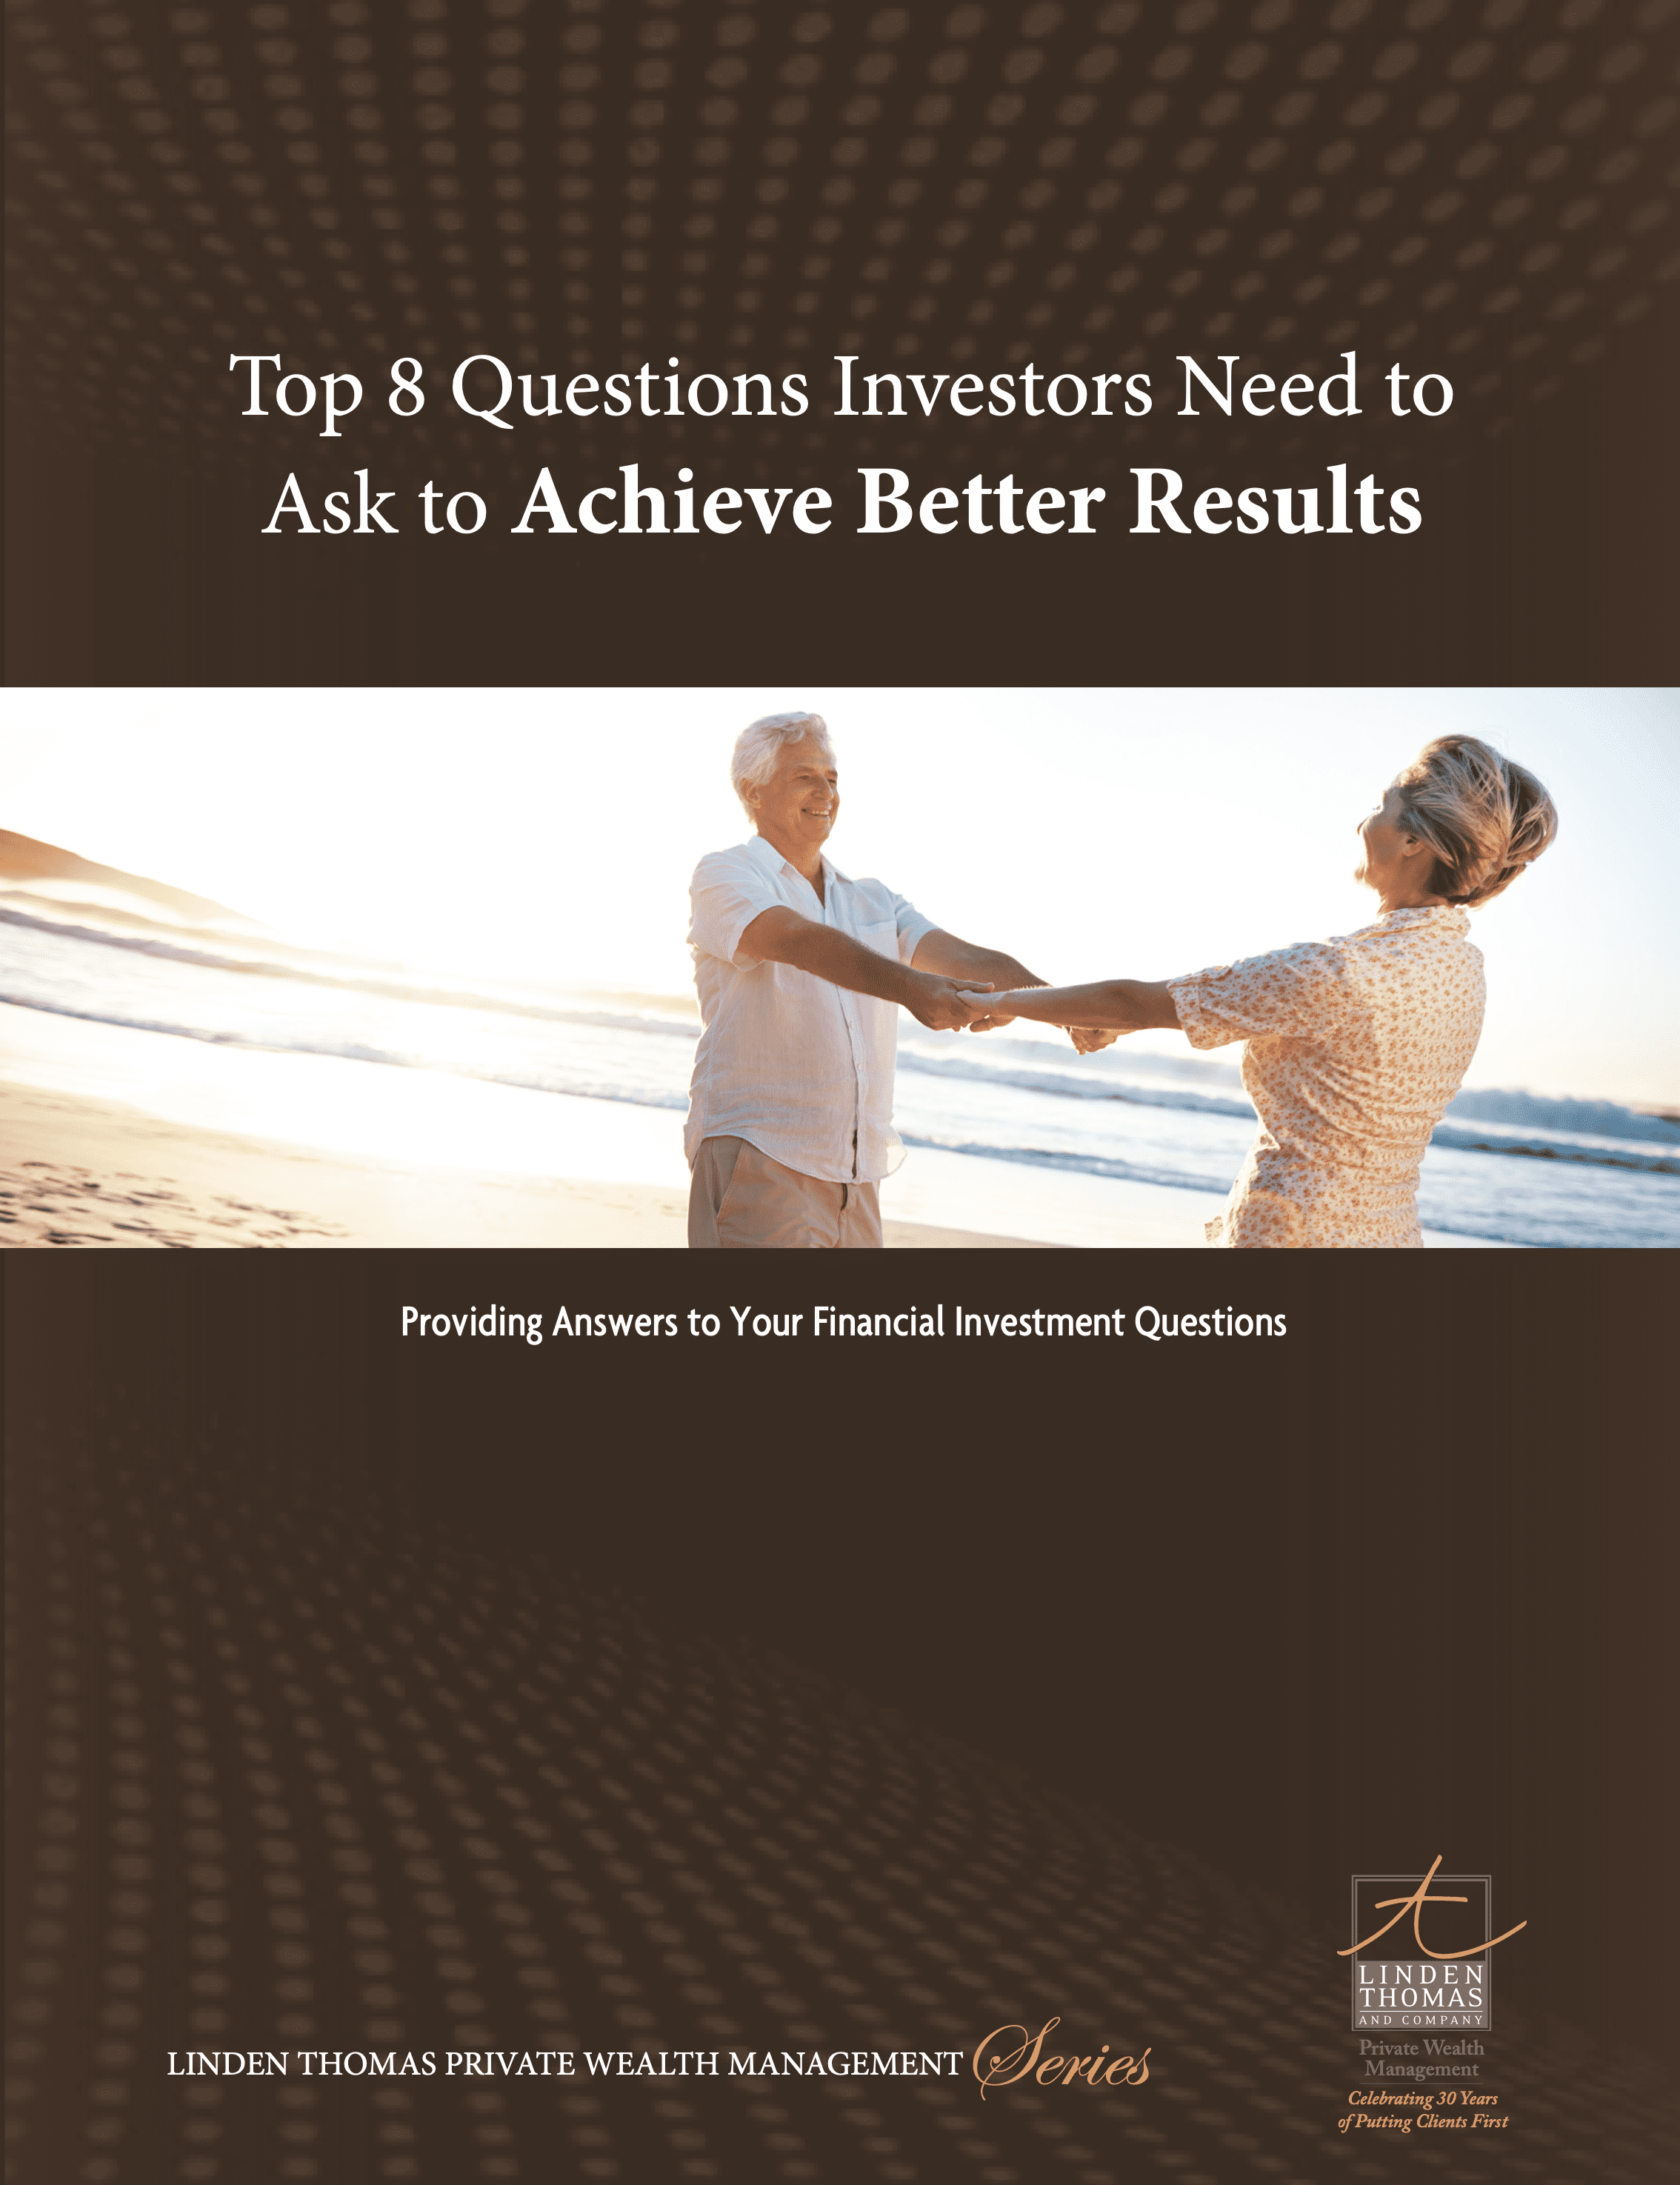 The Top 8 Questions Investors Need to Ask to Achieve Better Results